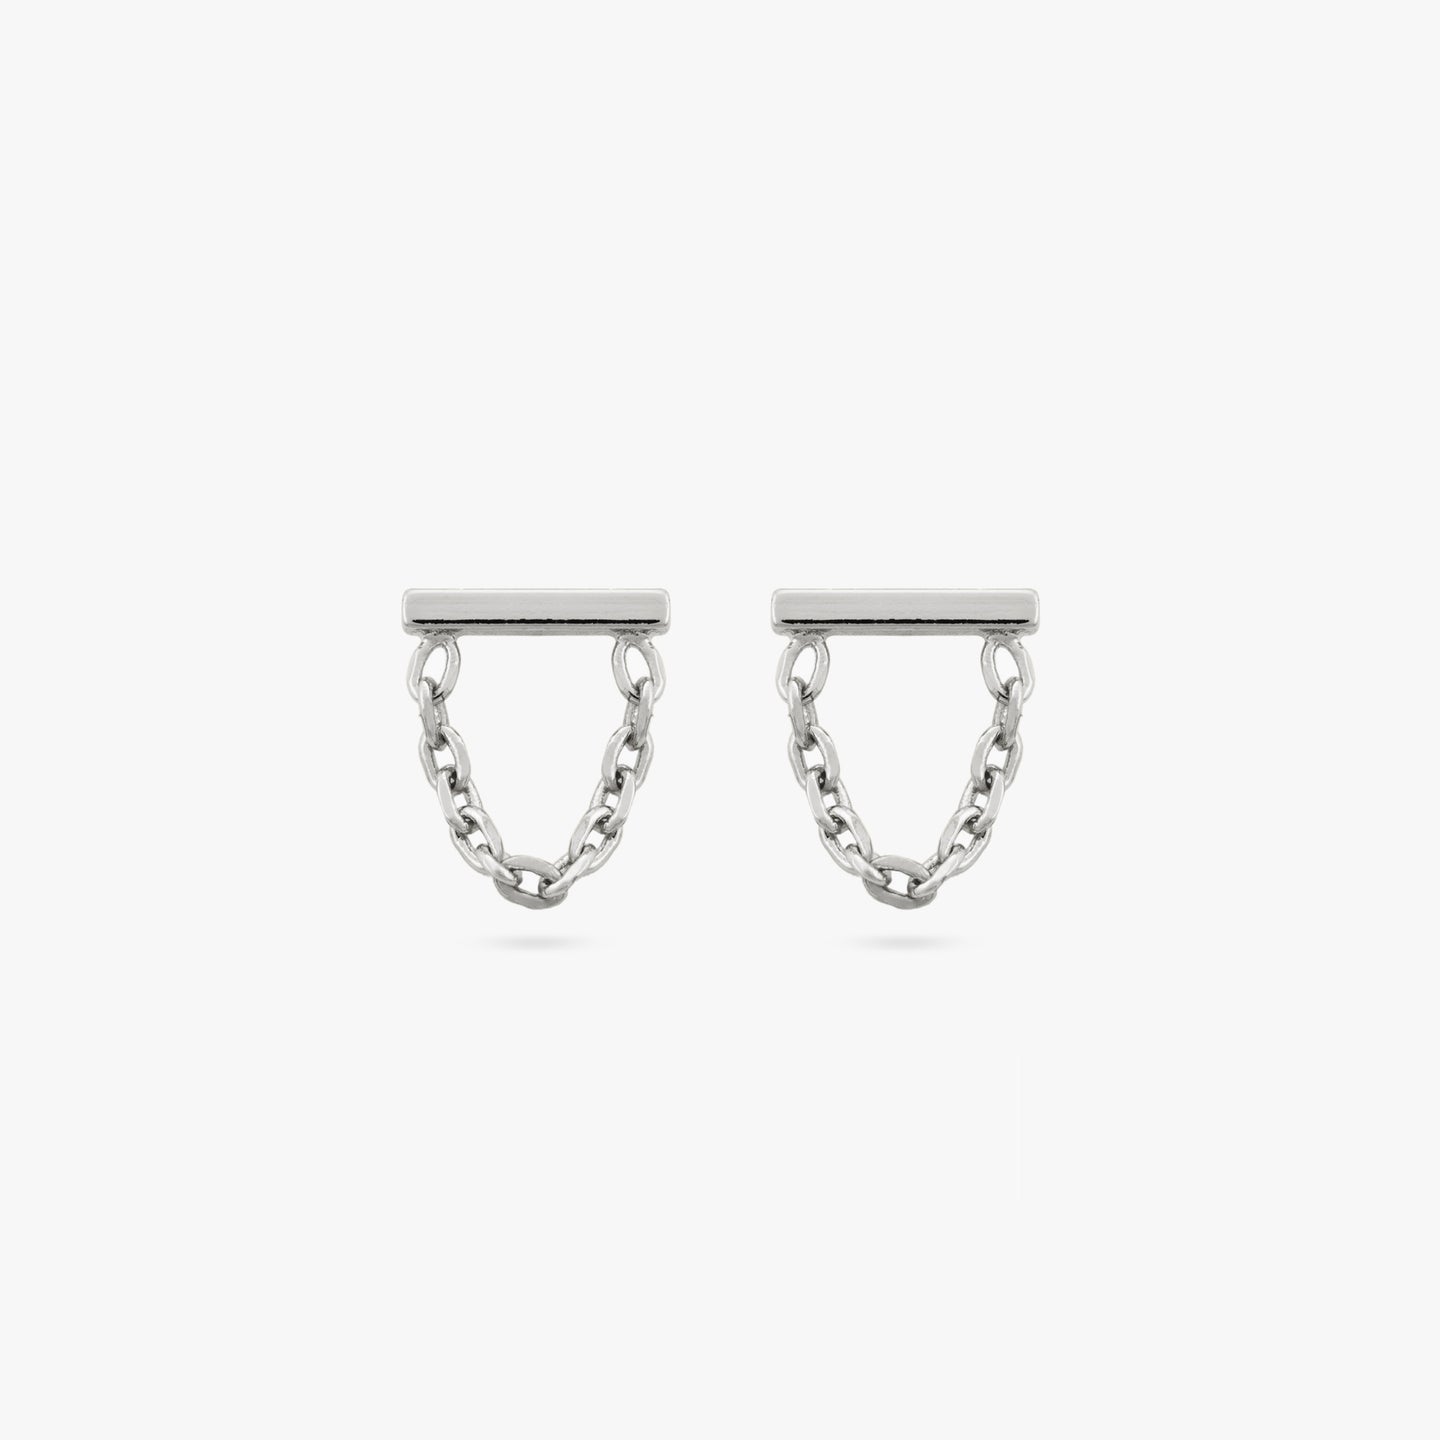 A pair of silver bar studs with chain connecting from end to end. [pair] color:null|silver